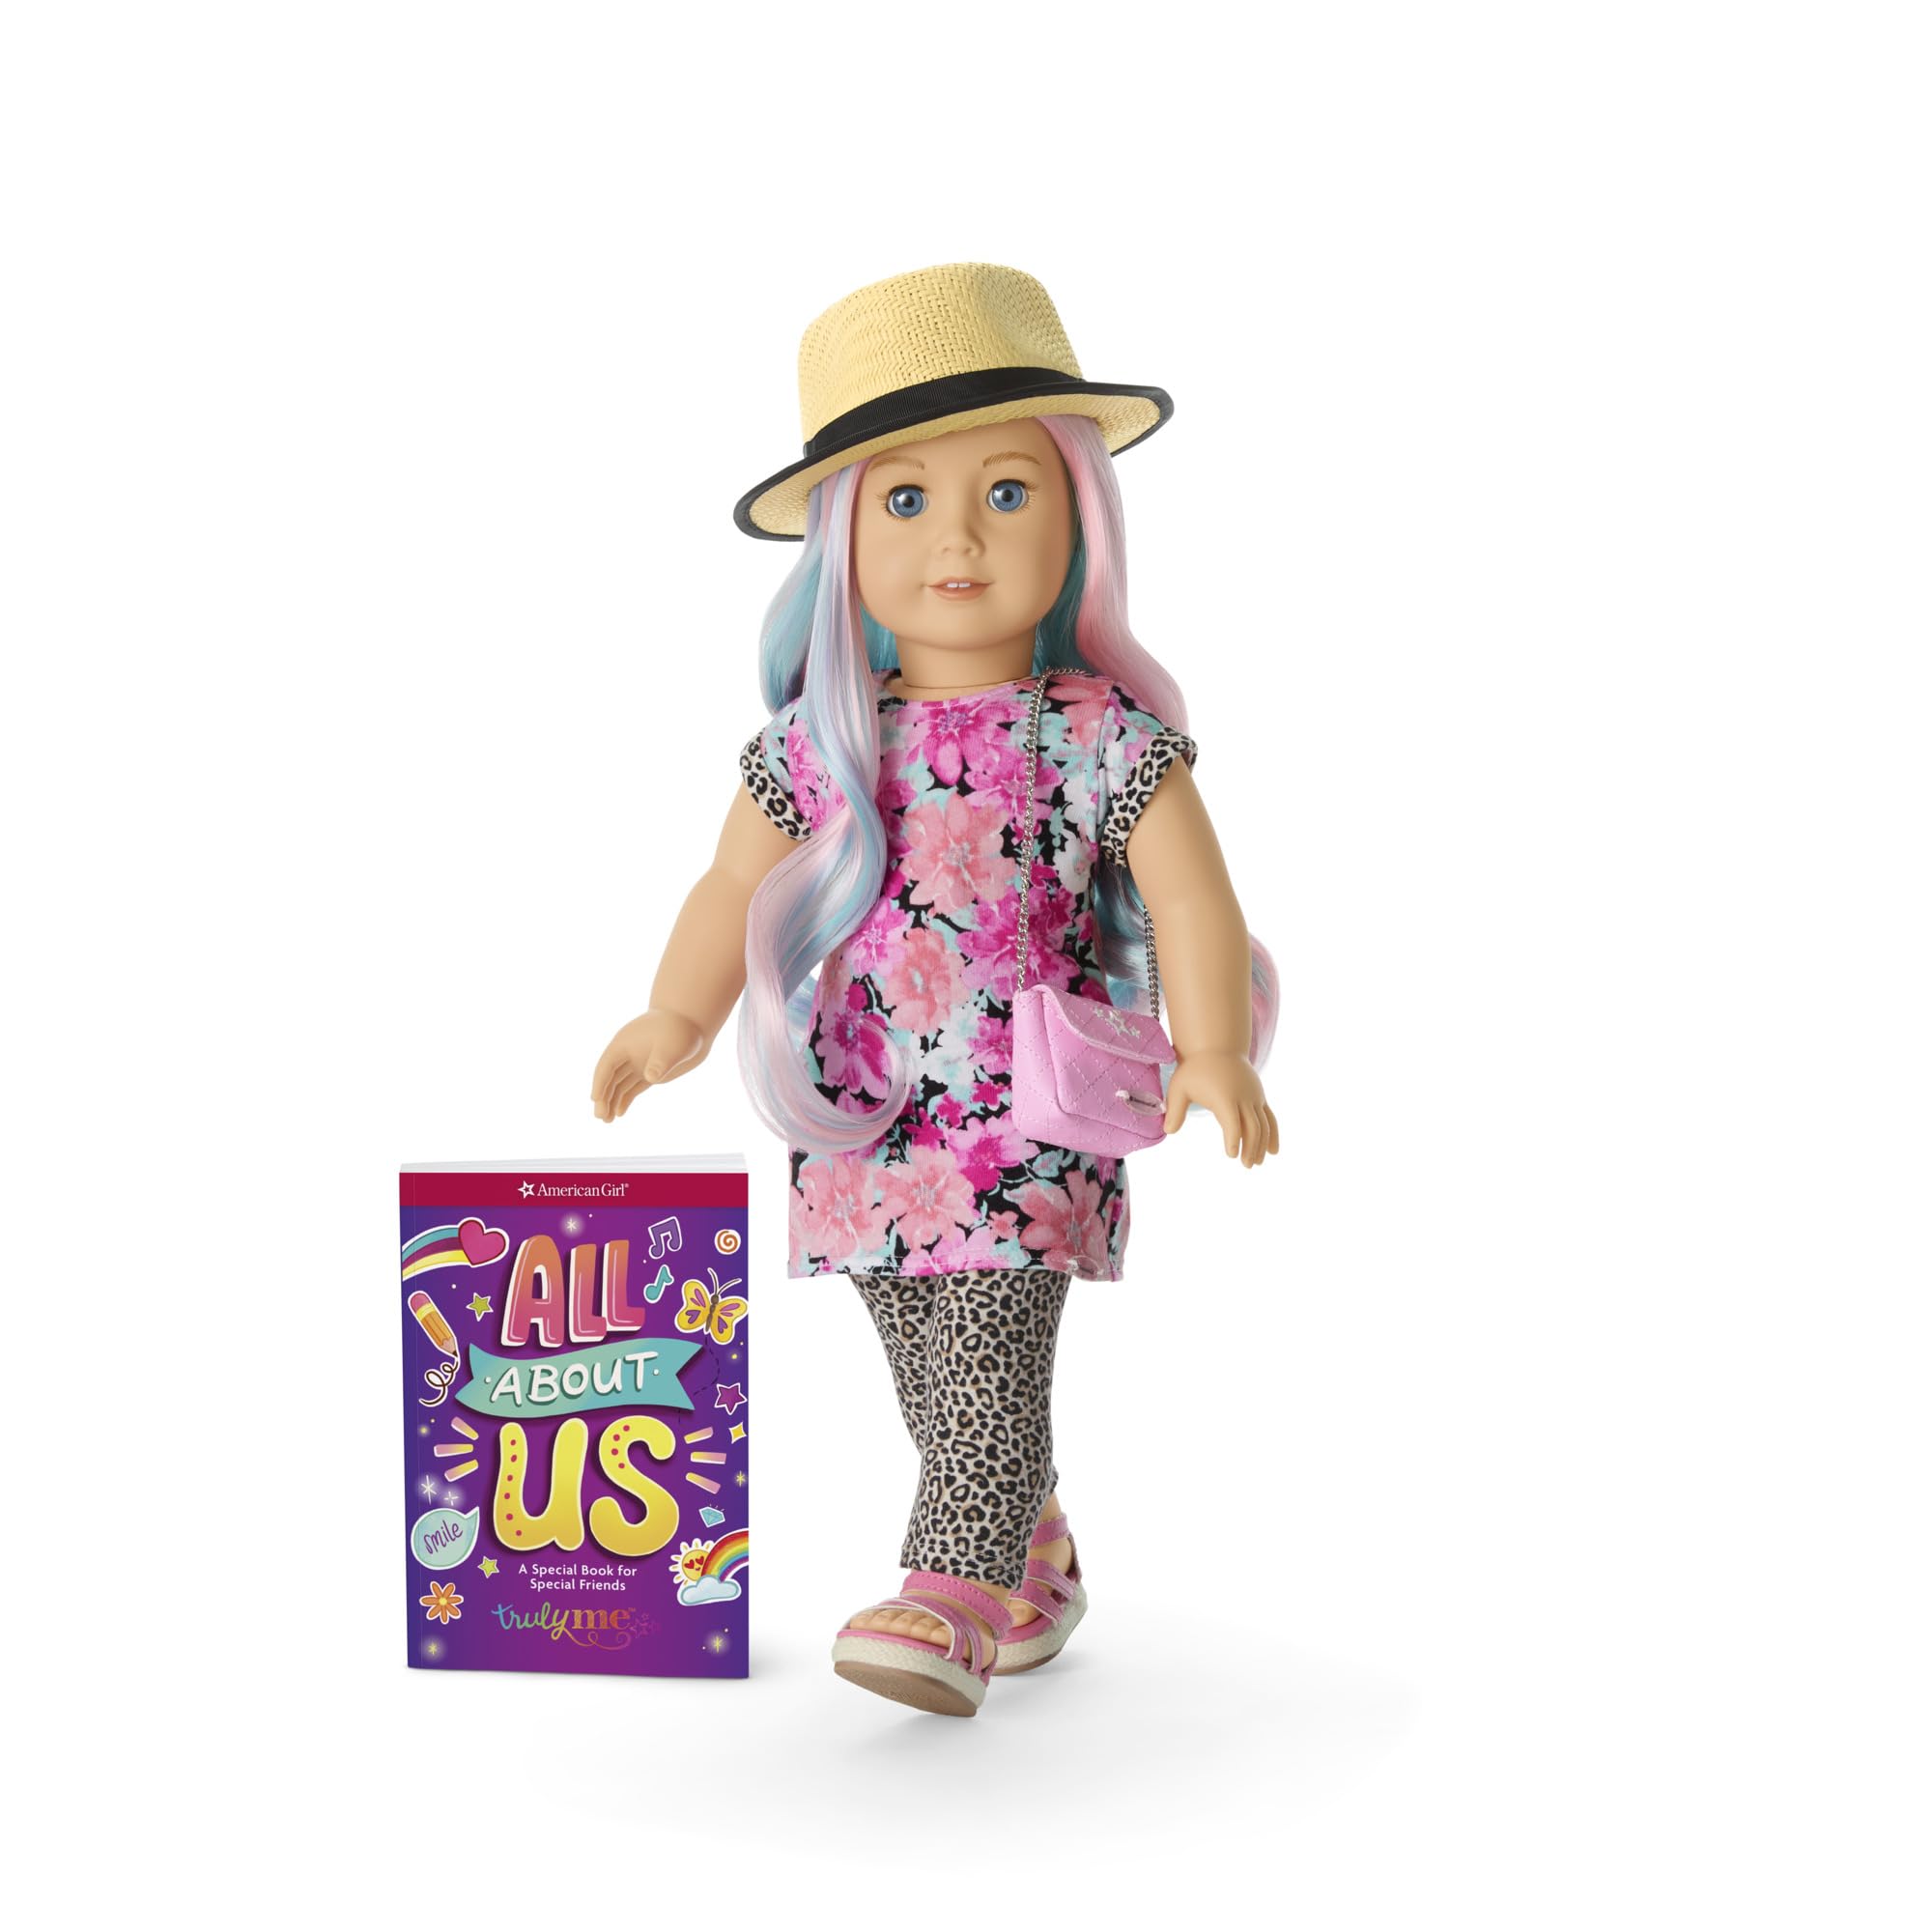 American Girl Truly Me 18-inch Doll #129 with Lt Blue Eyes, Multicolor Hair, Lt Skin with Warm Olive Undertones, for Ages 6+